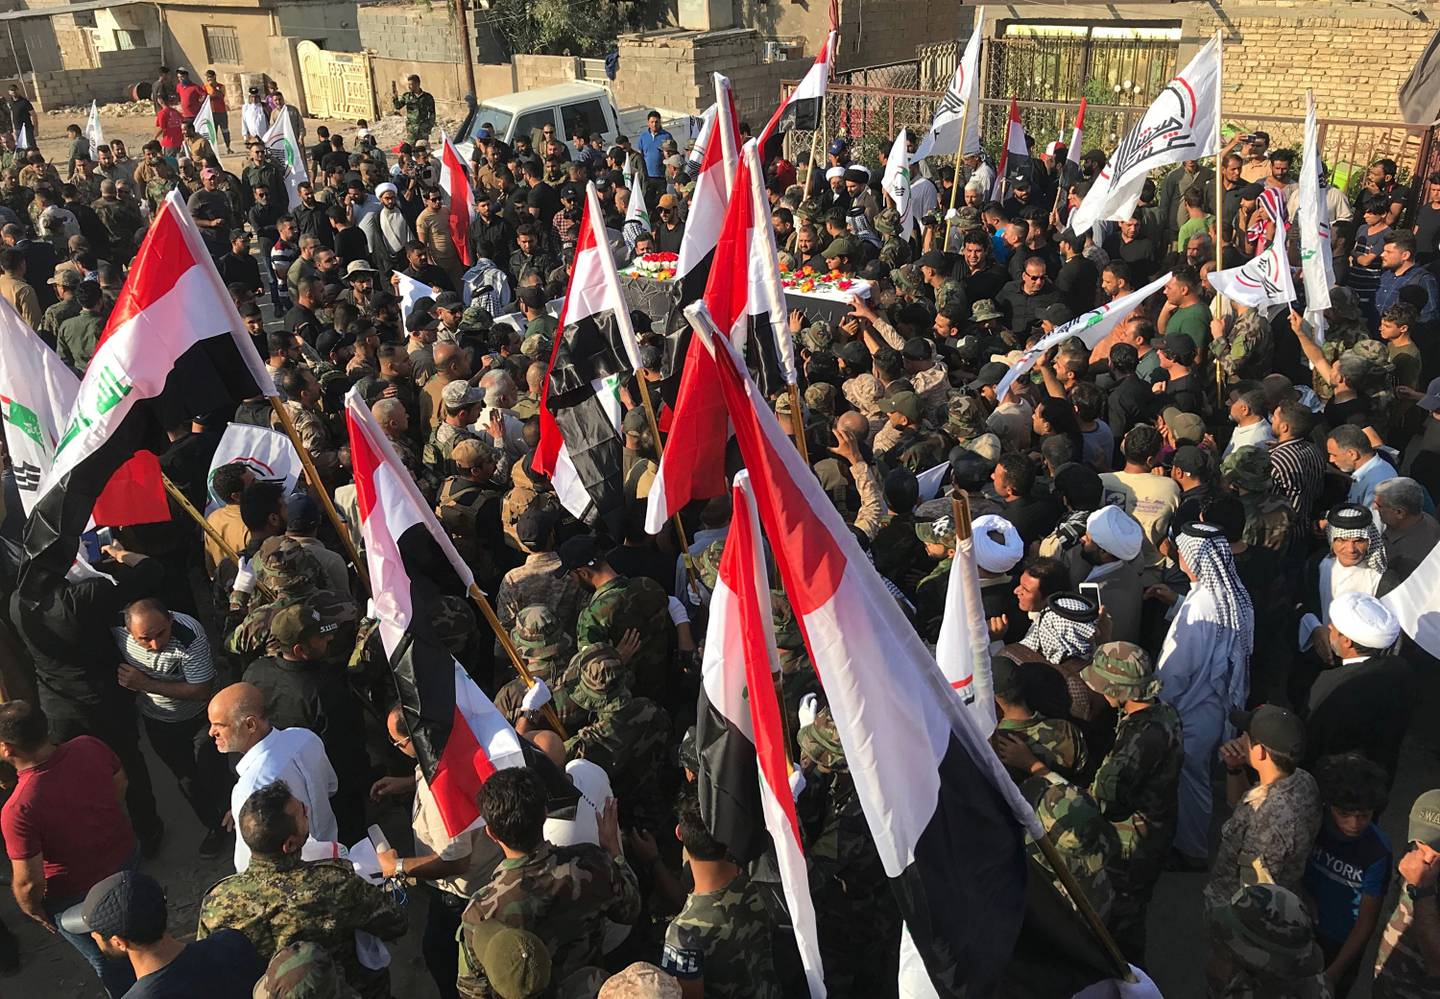 Mourners carry the coffin of Abu Ali al-Dabi, a fighter of the Popular Mobilization Forces killed in a drone attack, during his funeral procession in Baghdad, Iraq, Monday, Aug. 26, 2019.